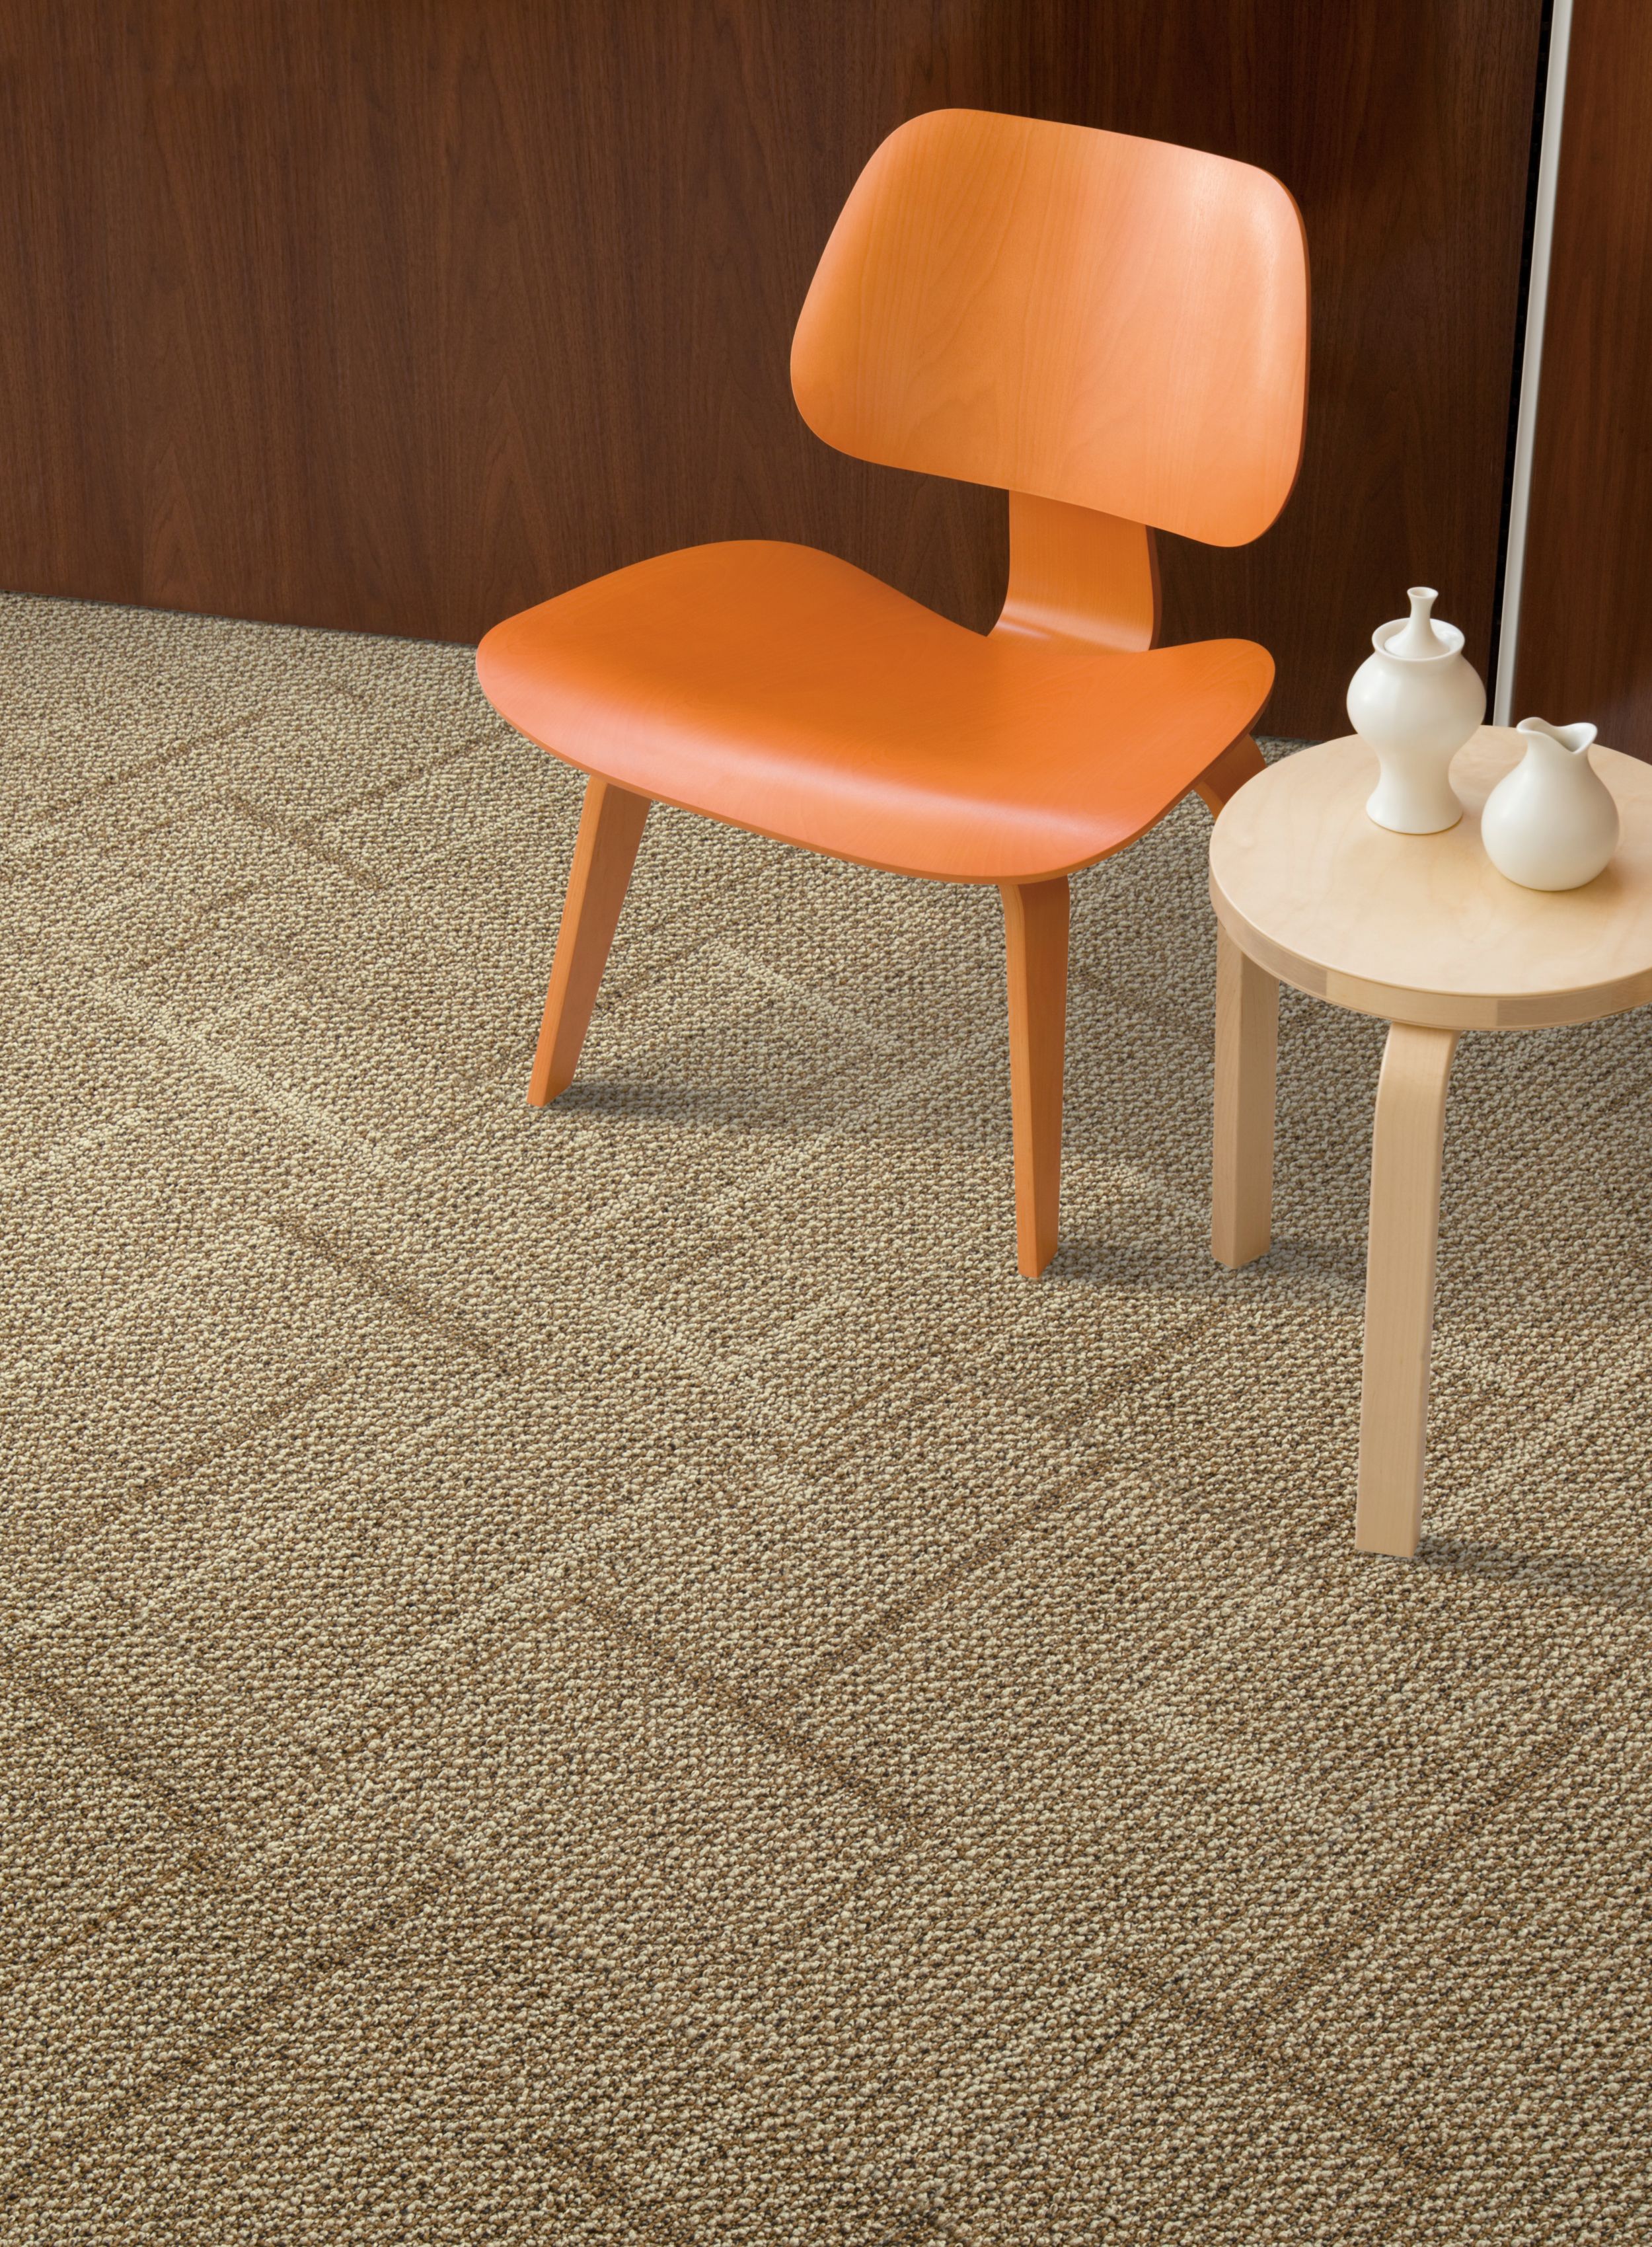 Interface Furrows II carpet tile detail with wood chair imagen número 1